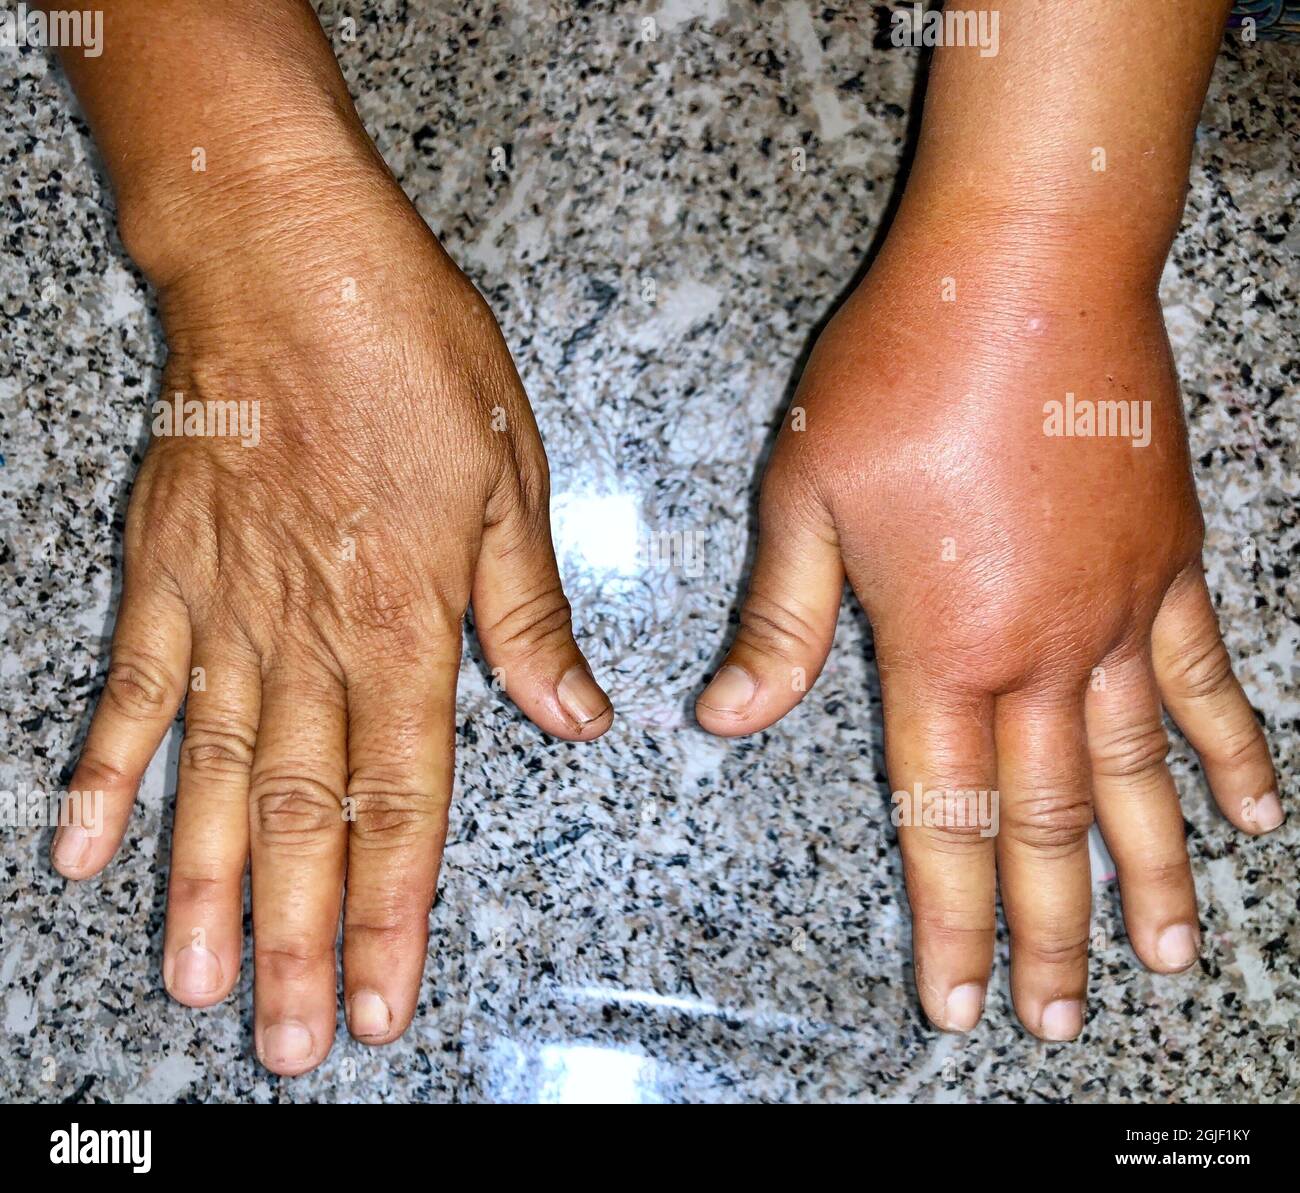 Unilateral edema of upper limb. Swollen hand and arm of Asian woman. Compared to normal forearm. Stock Photo